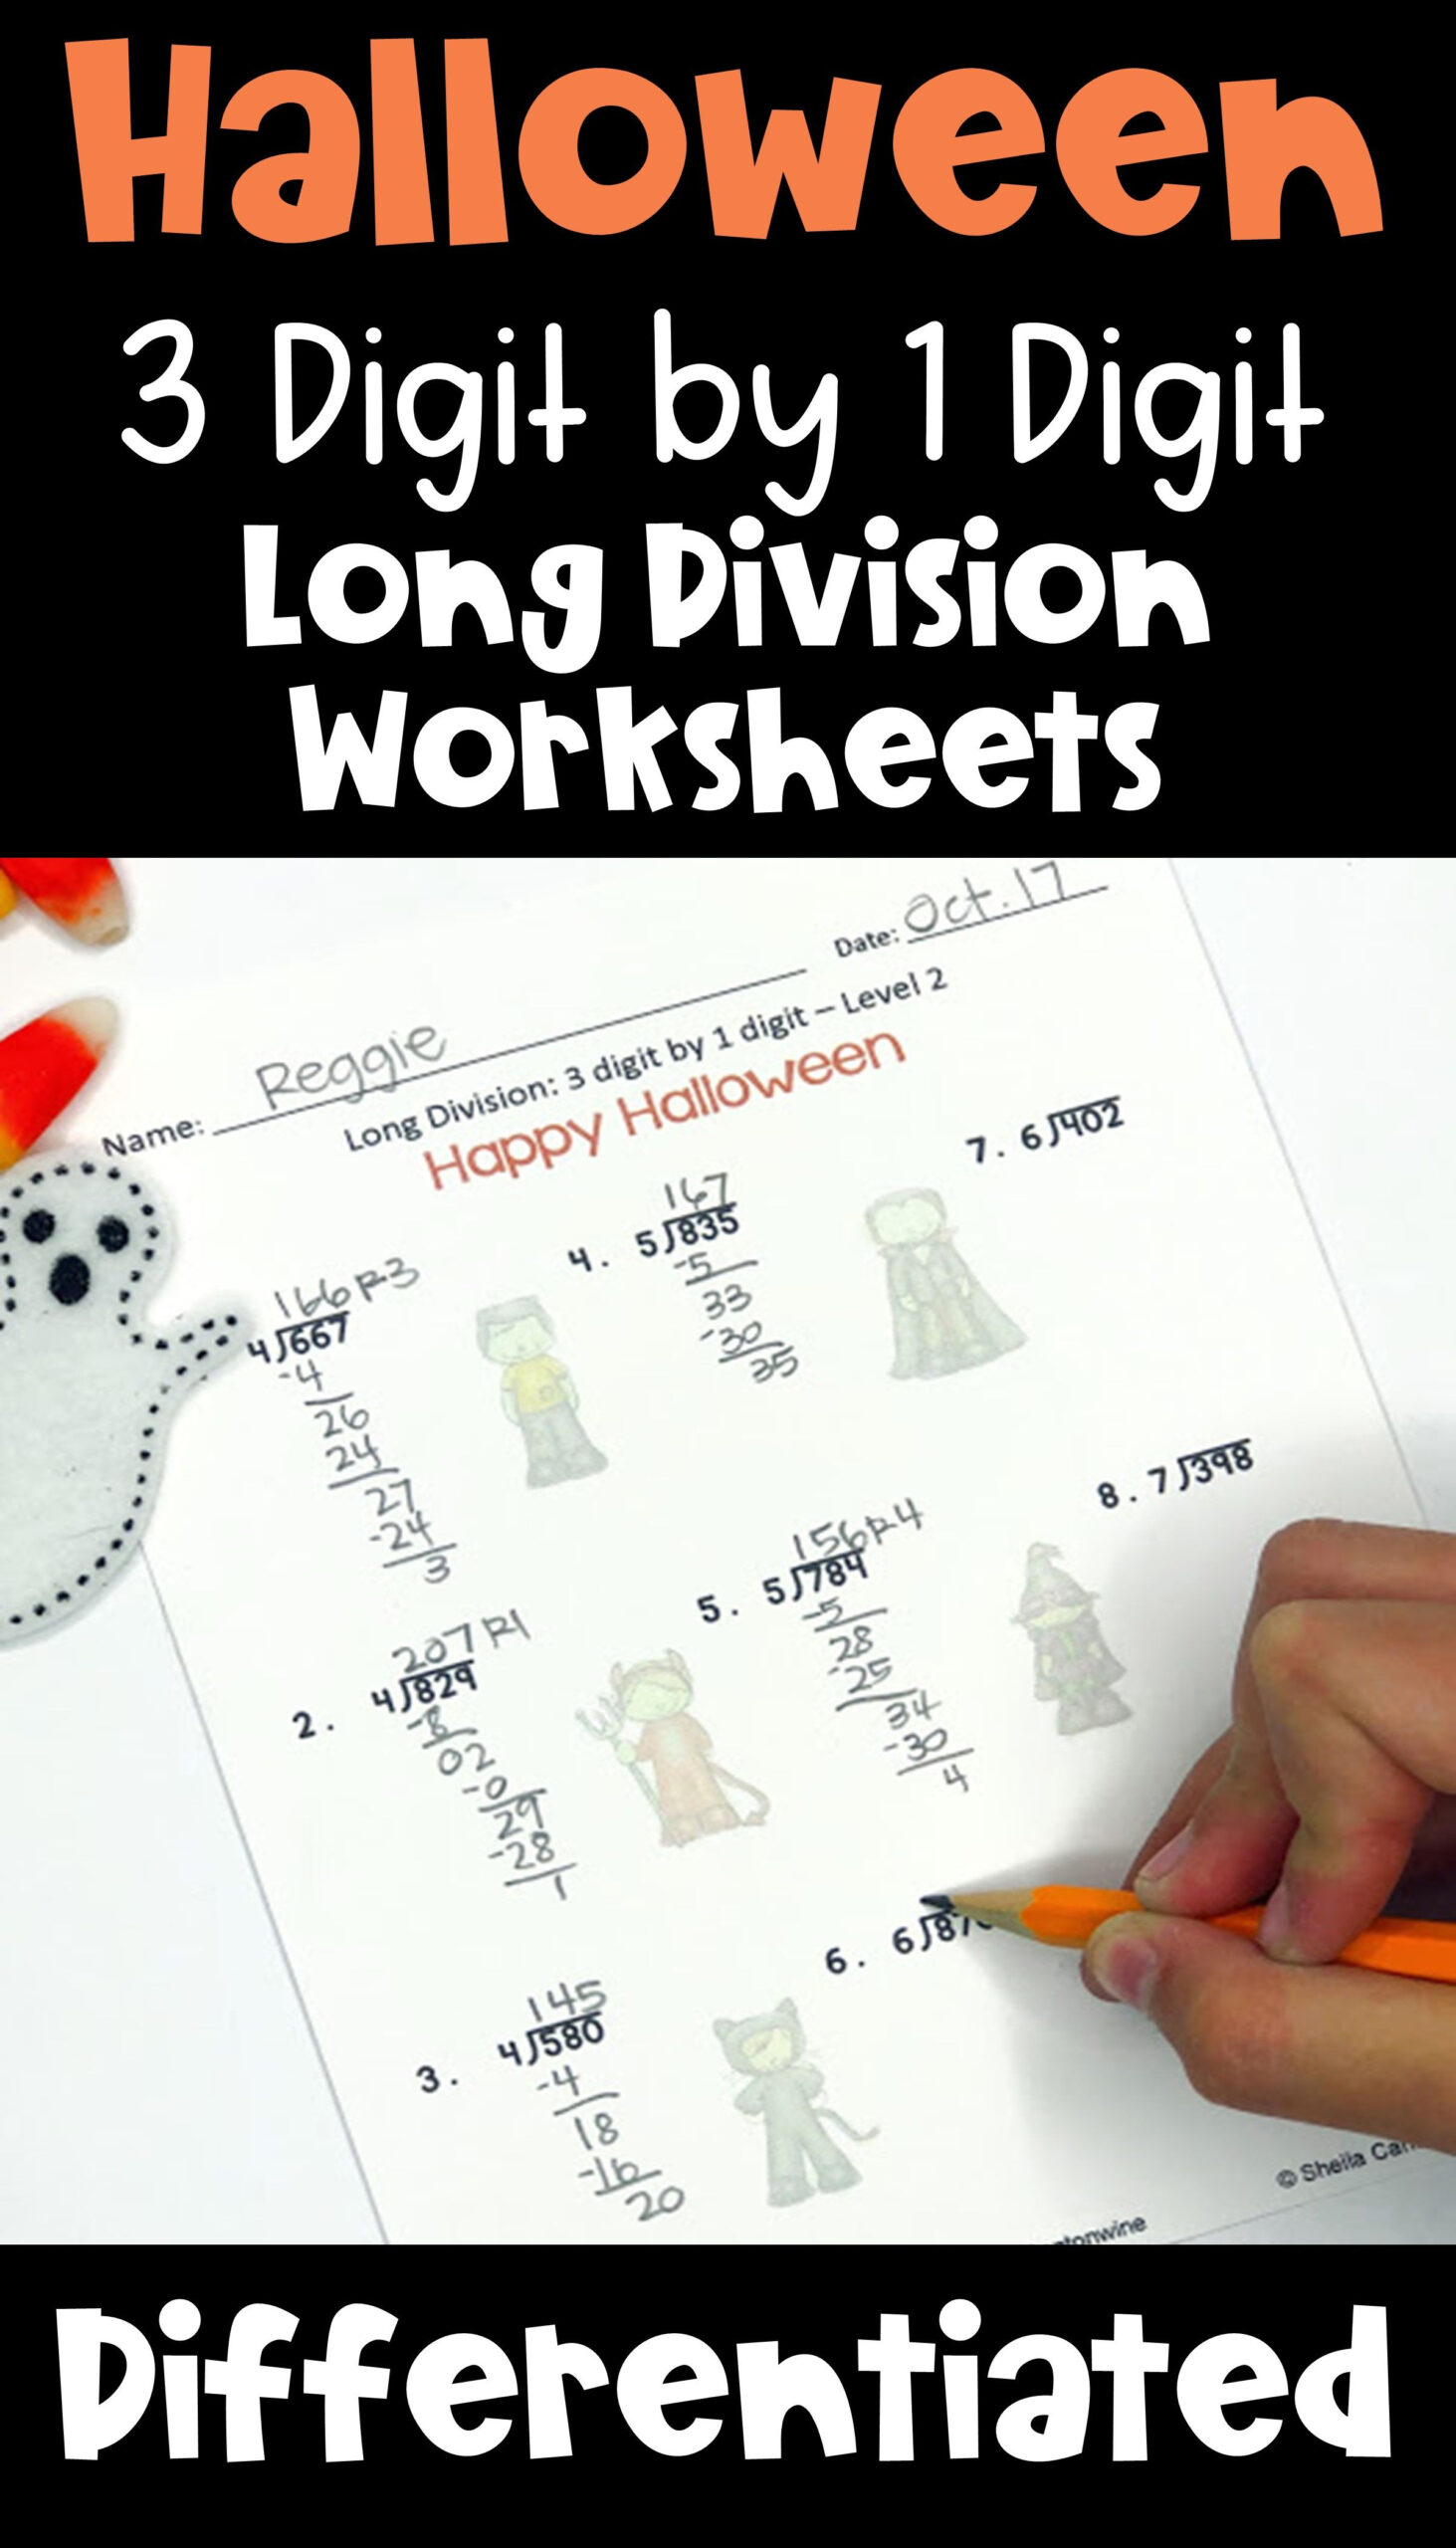 Halloween 3 Digit By 1 Digit Long Division Worksheets Halloween Math 